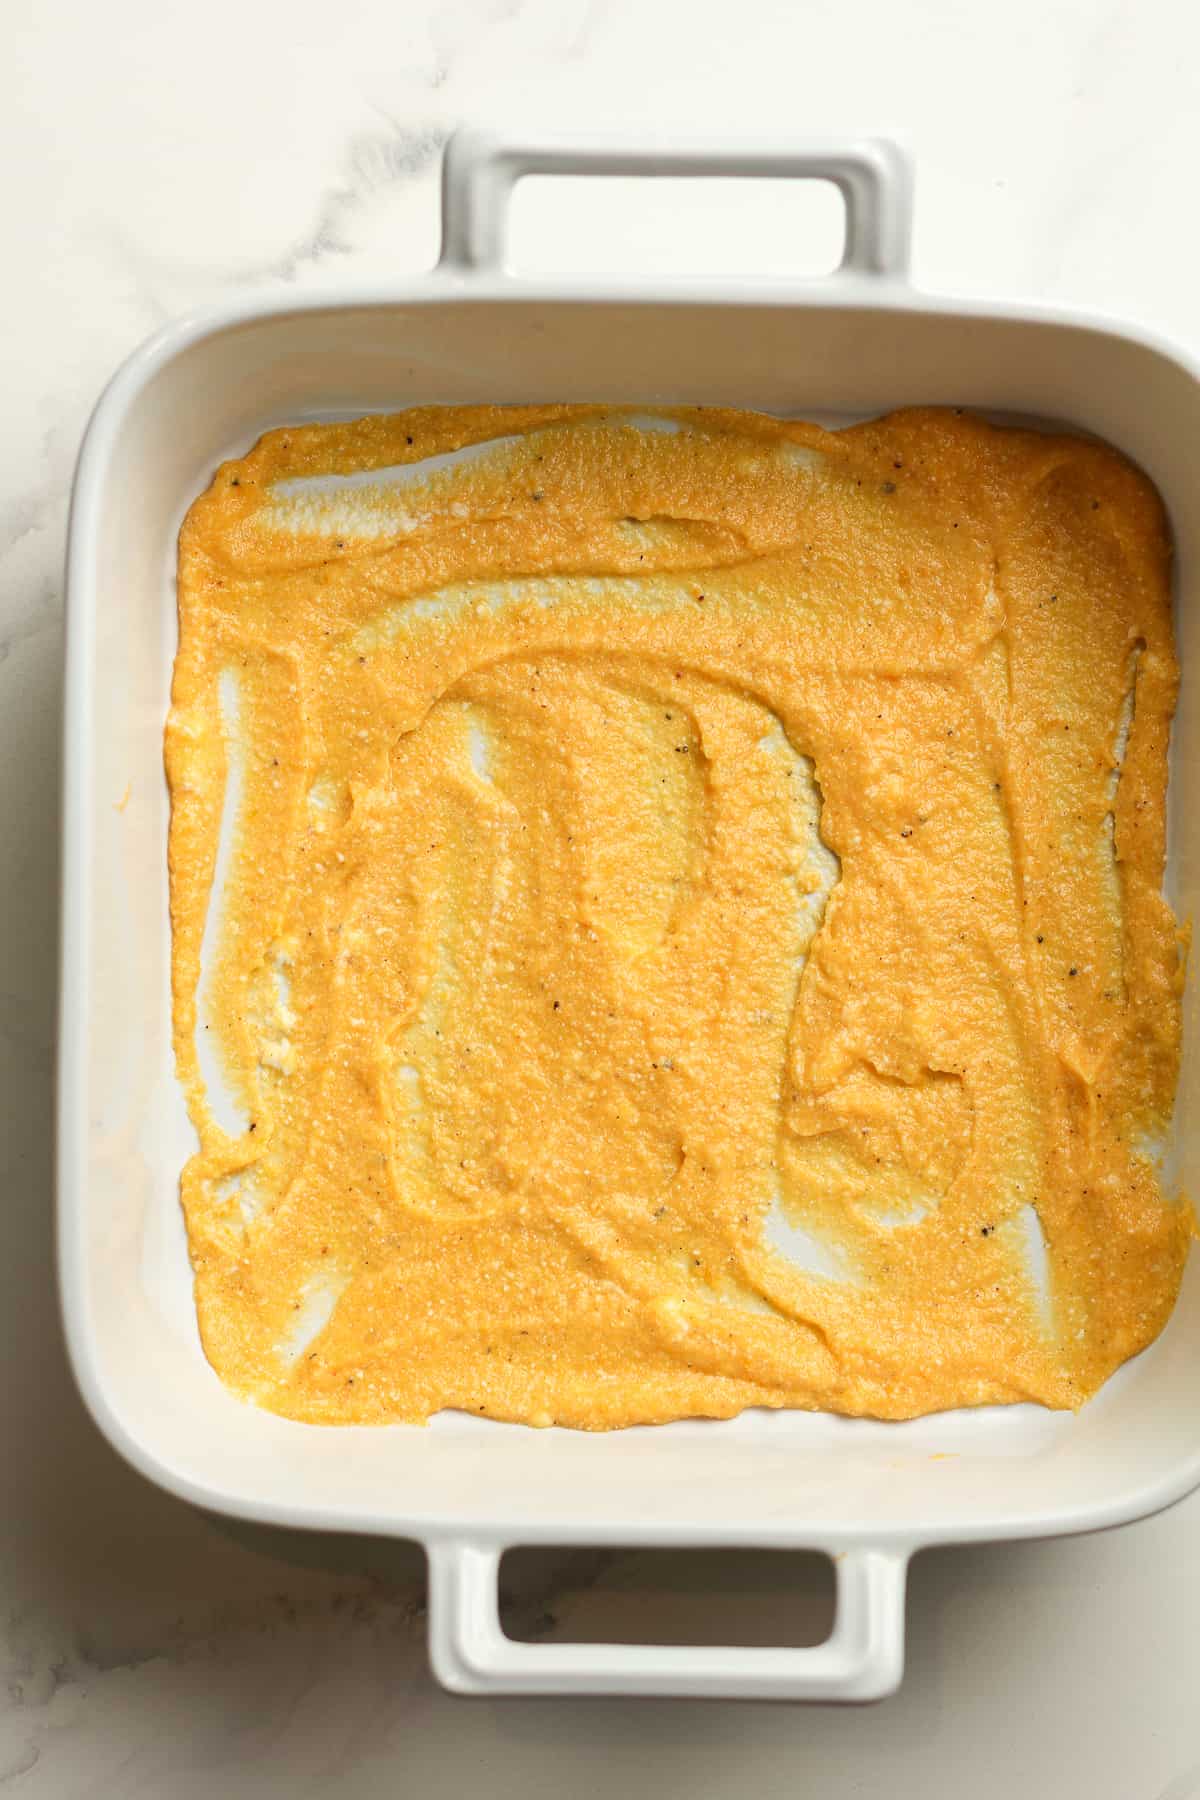 A square casserole dish with some squash puree on bottom of pan.